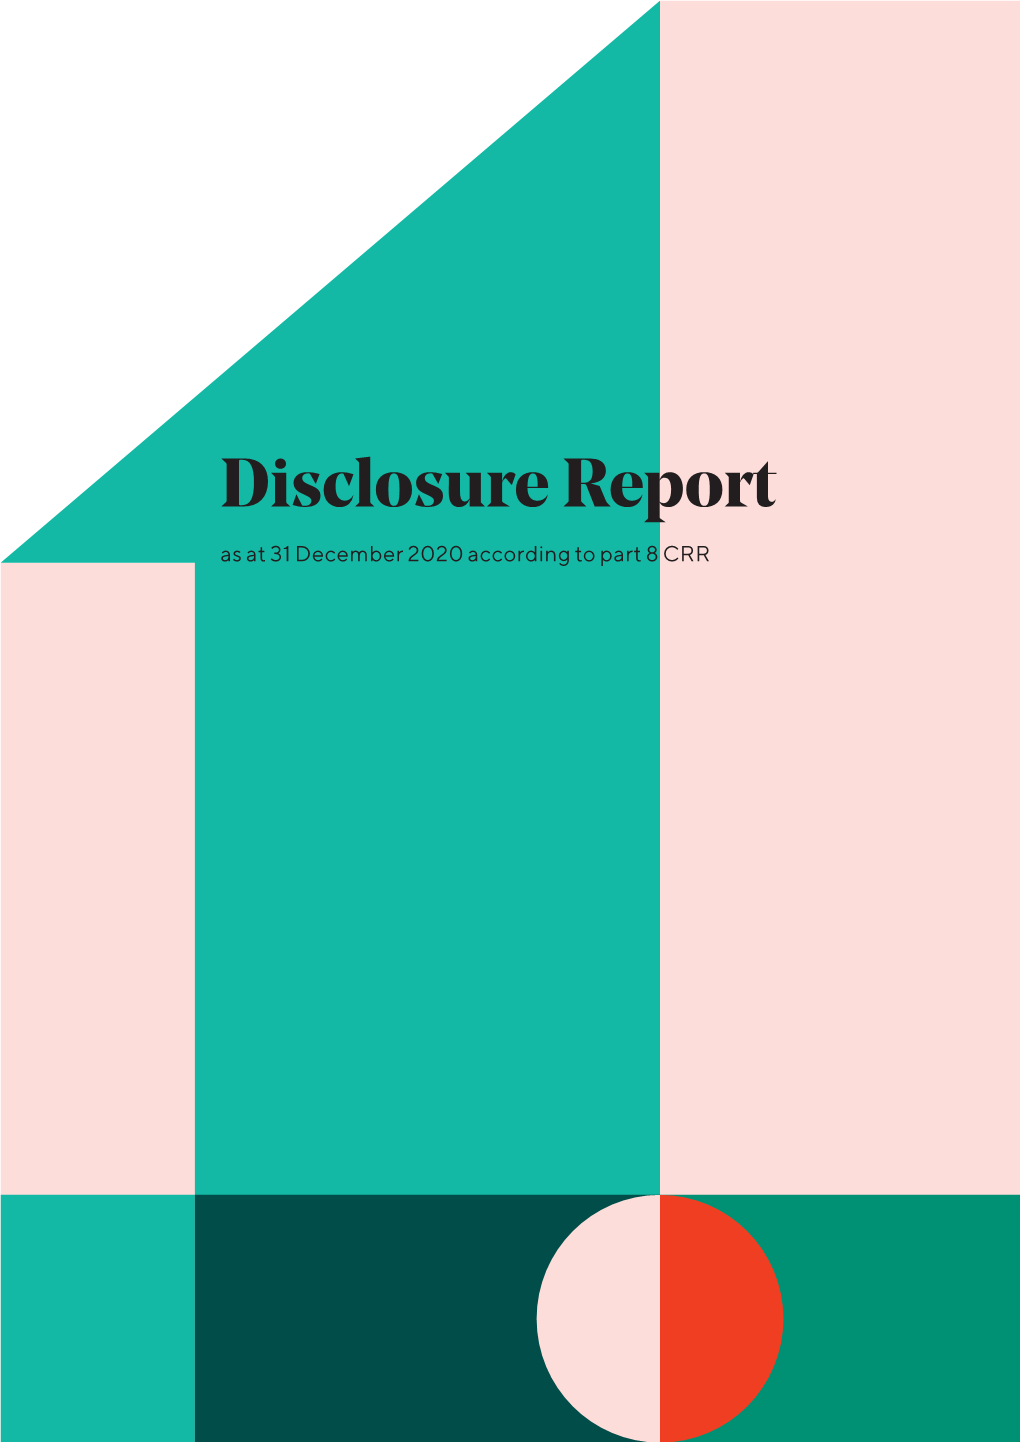 Disclosure Report As at 31 December 2020 According to Part 8 CRR